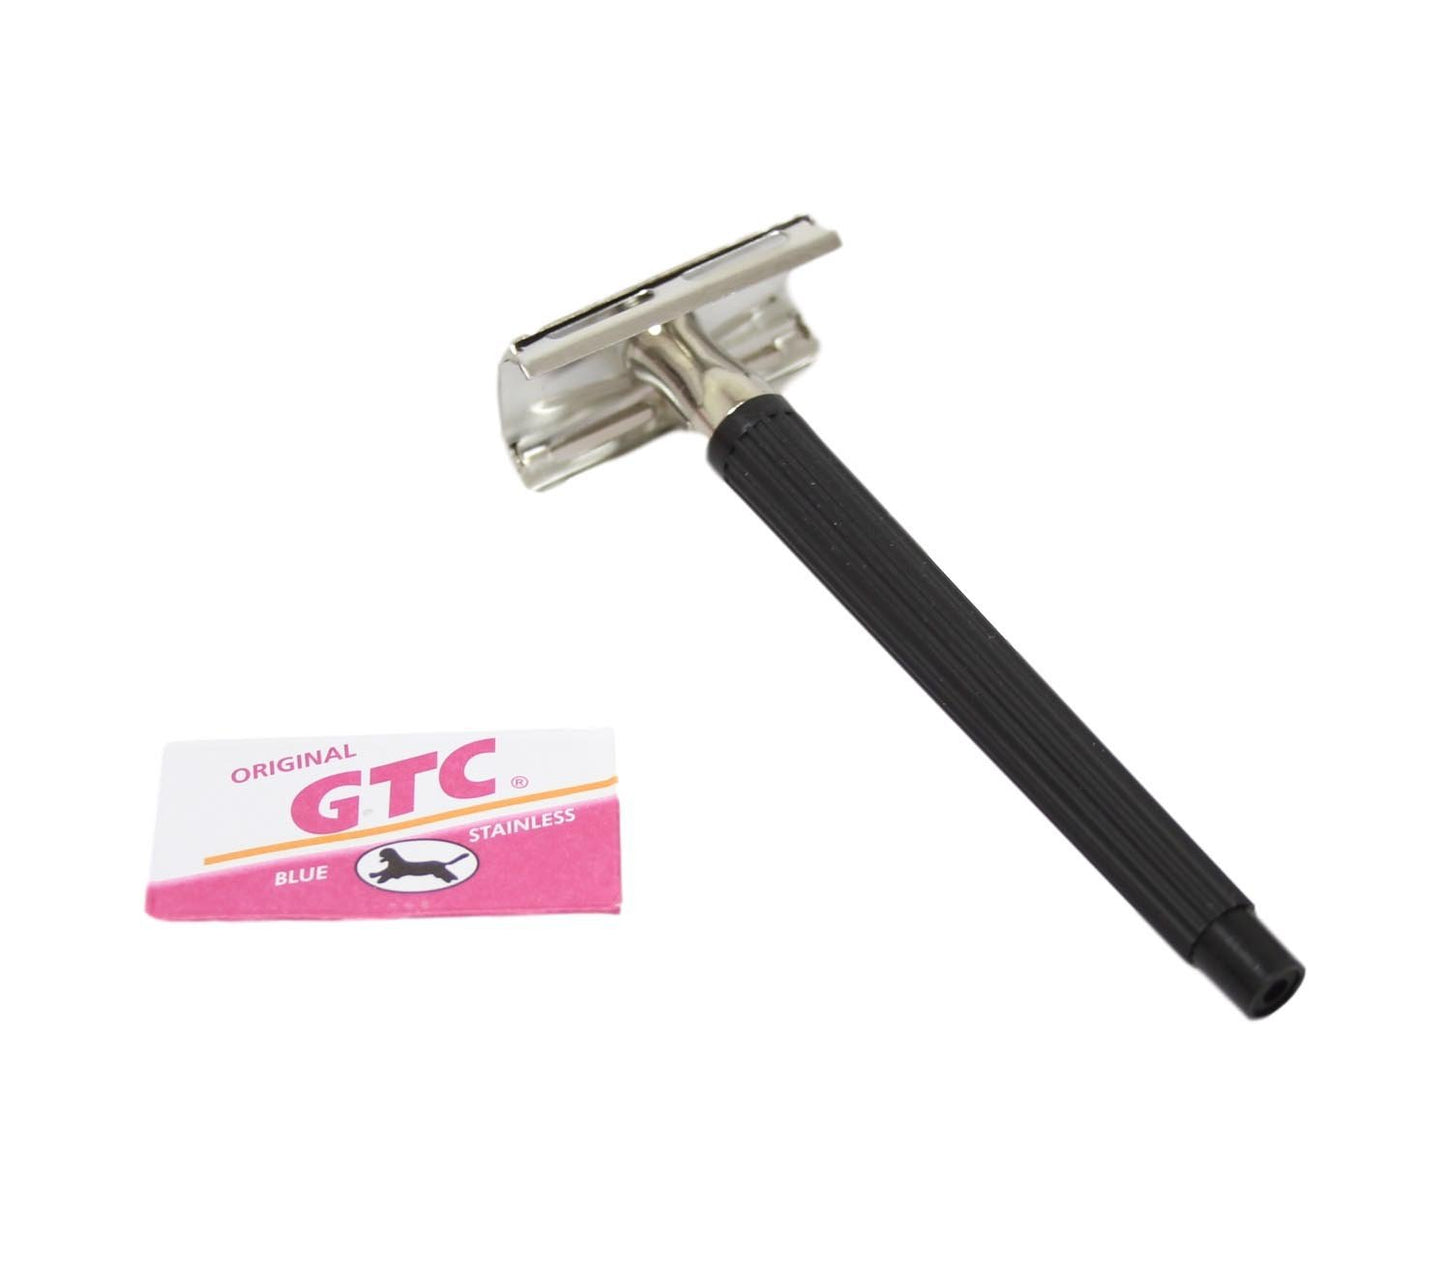 New Stainless Steel Original Razor with 2 GTC Stainless Blades Grooming Eraser 6249 (Large Letter Rate)